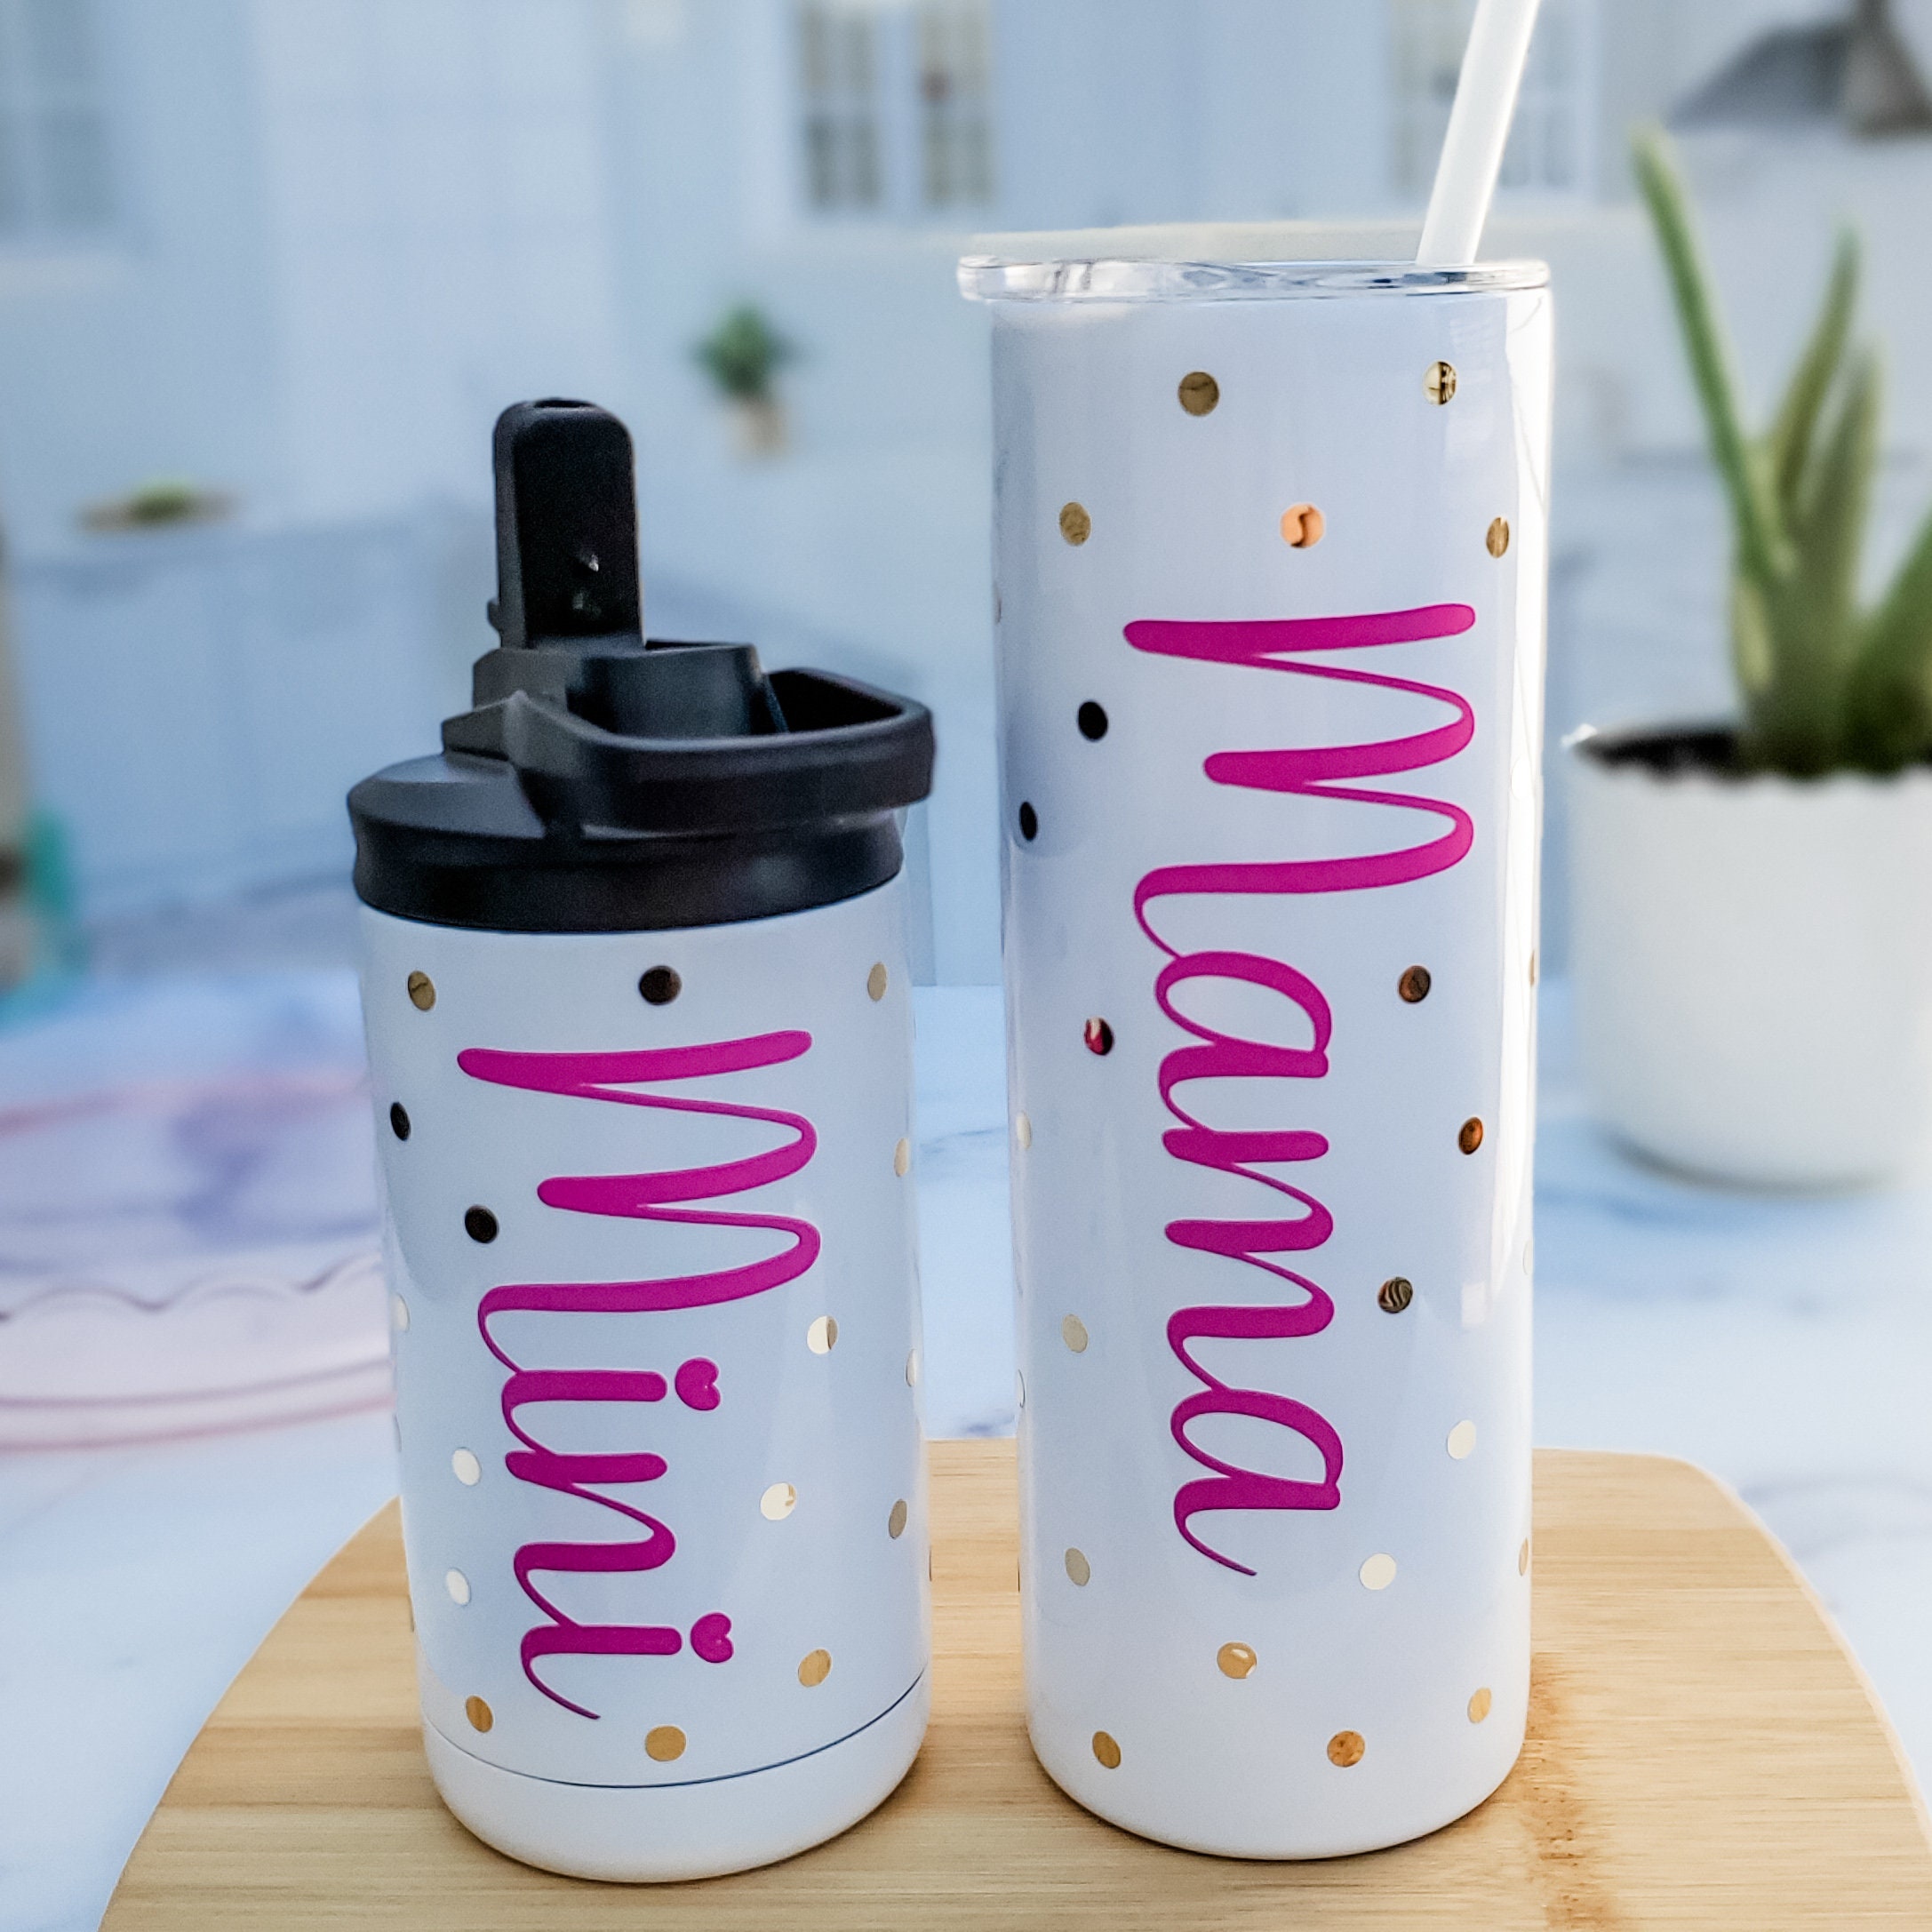 10 oz Promo Sippy Cup Kids Tumblers -Mix & Match- Bulk Wholesale  Personalized Engraved or Full Color Print Logo